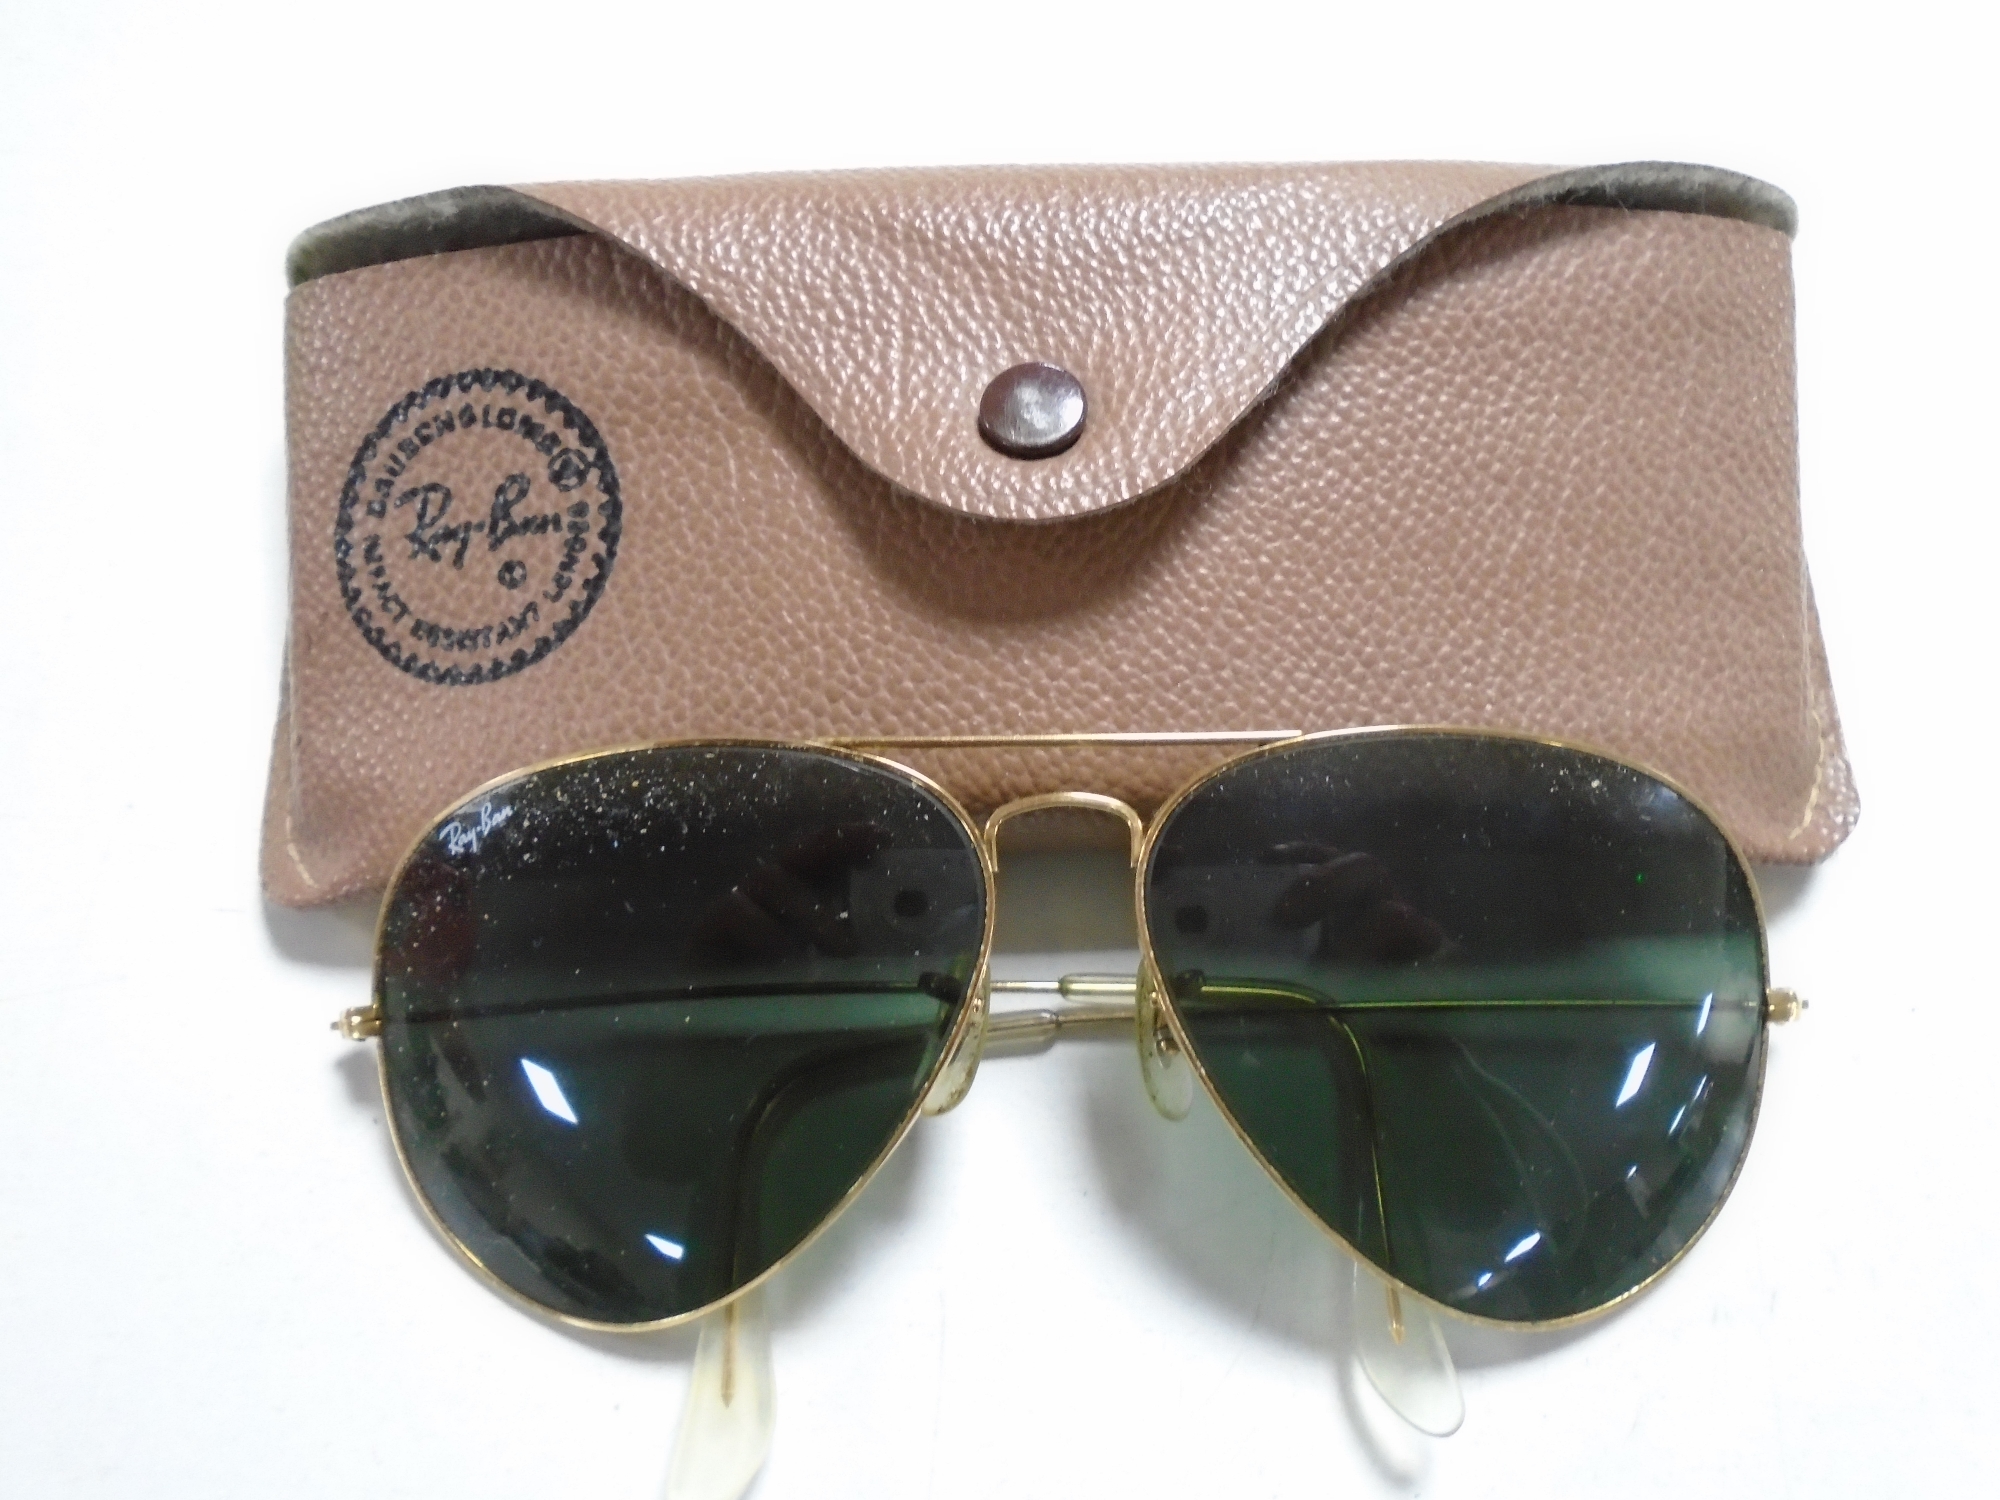 A pair of Ray-Ban aviator sunglasses in case.